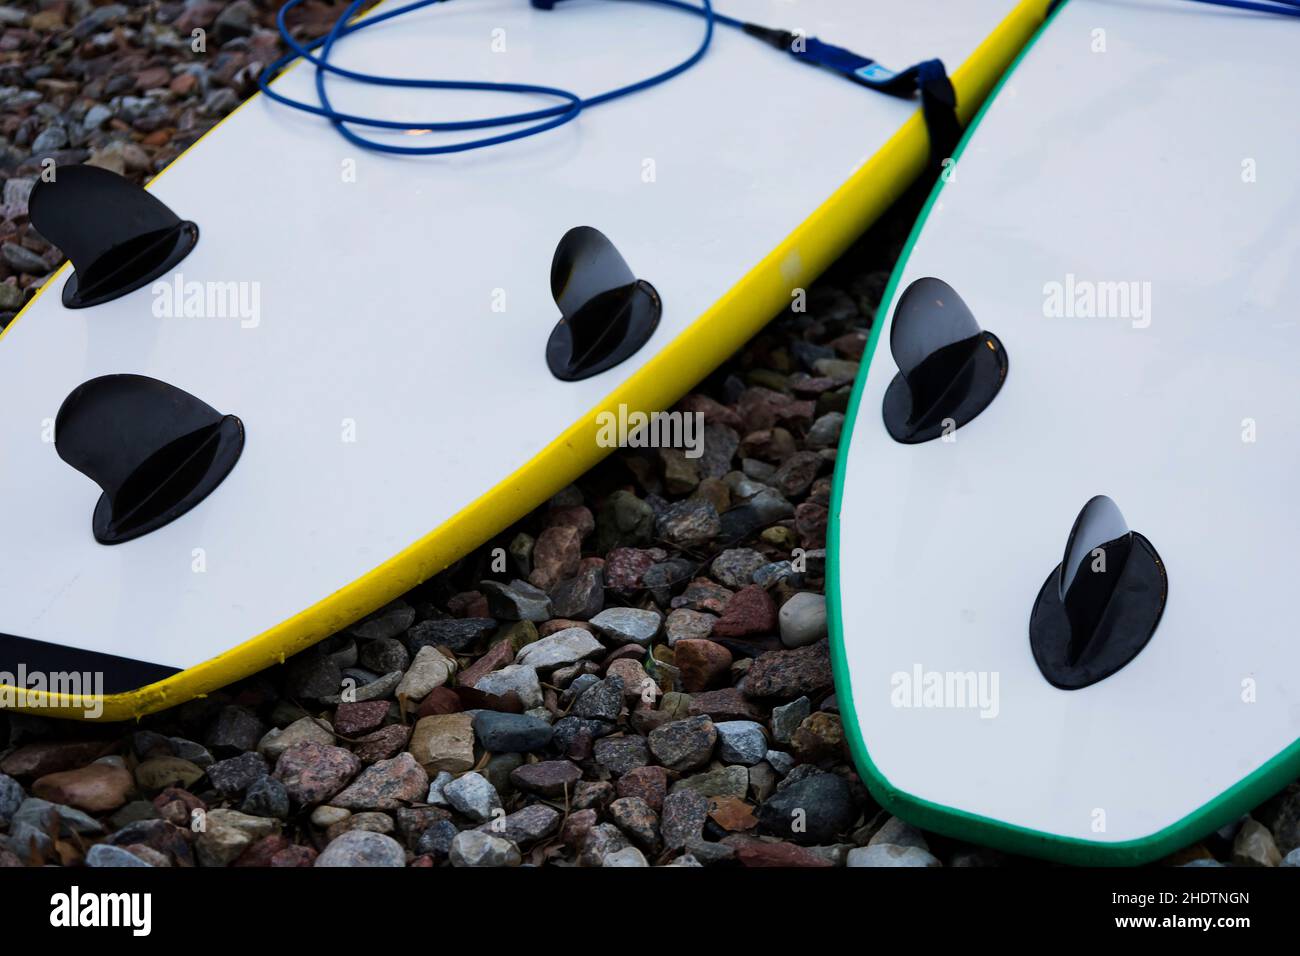 Windsurfing boards on the beach. Windsurfing and active lifestyle. Stock Photo